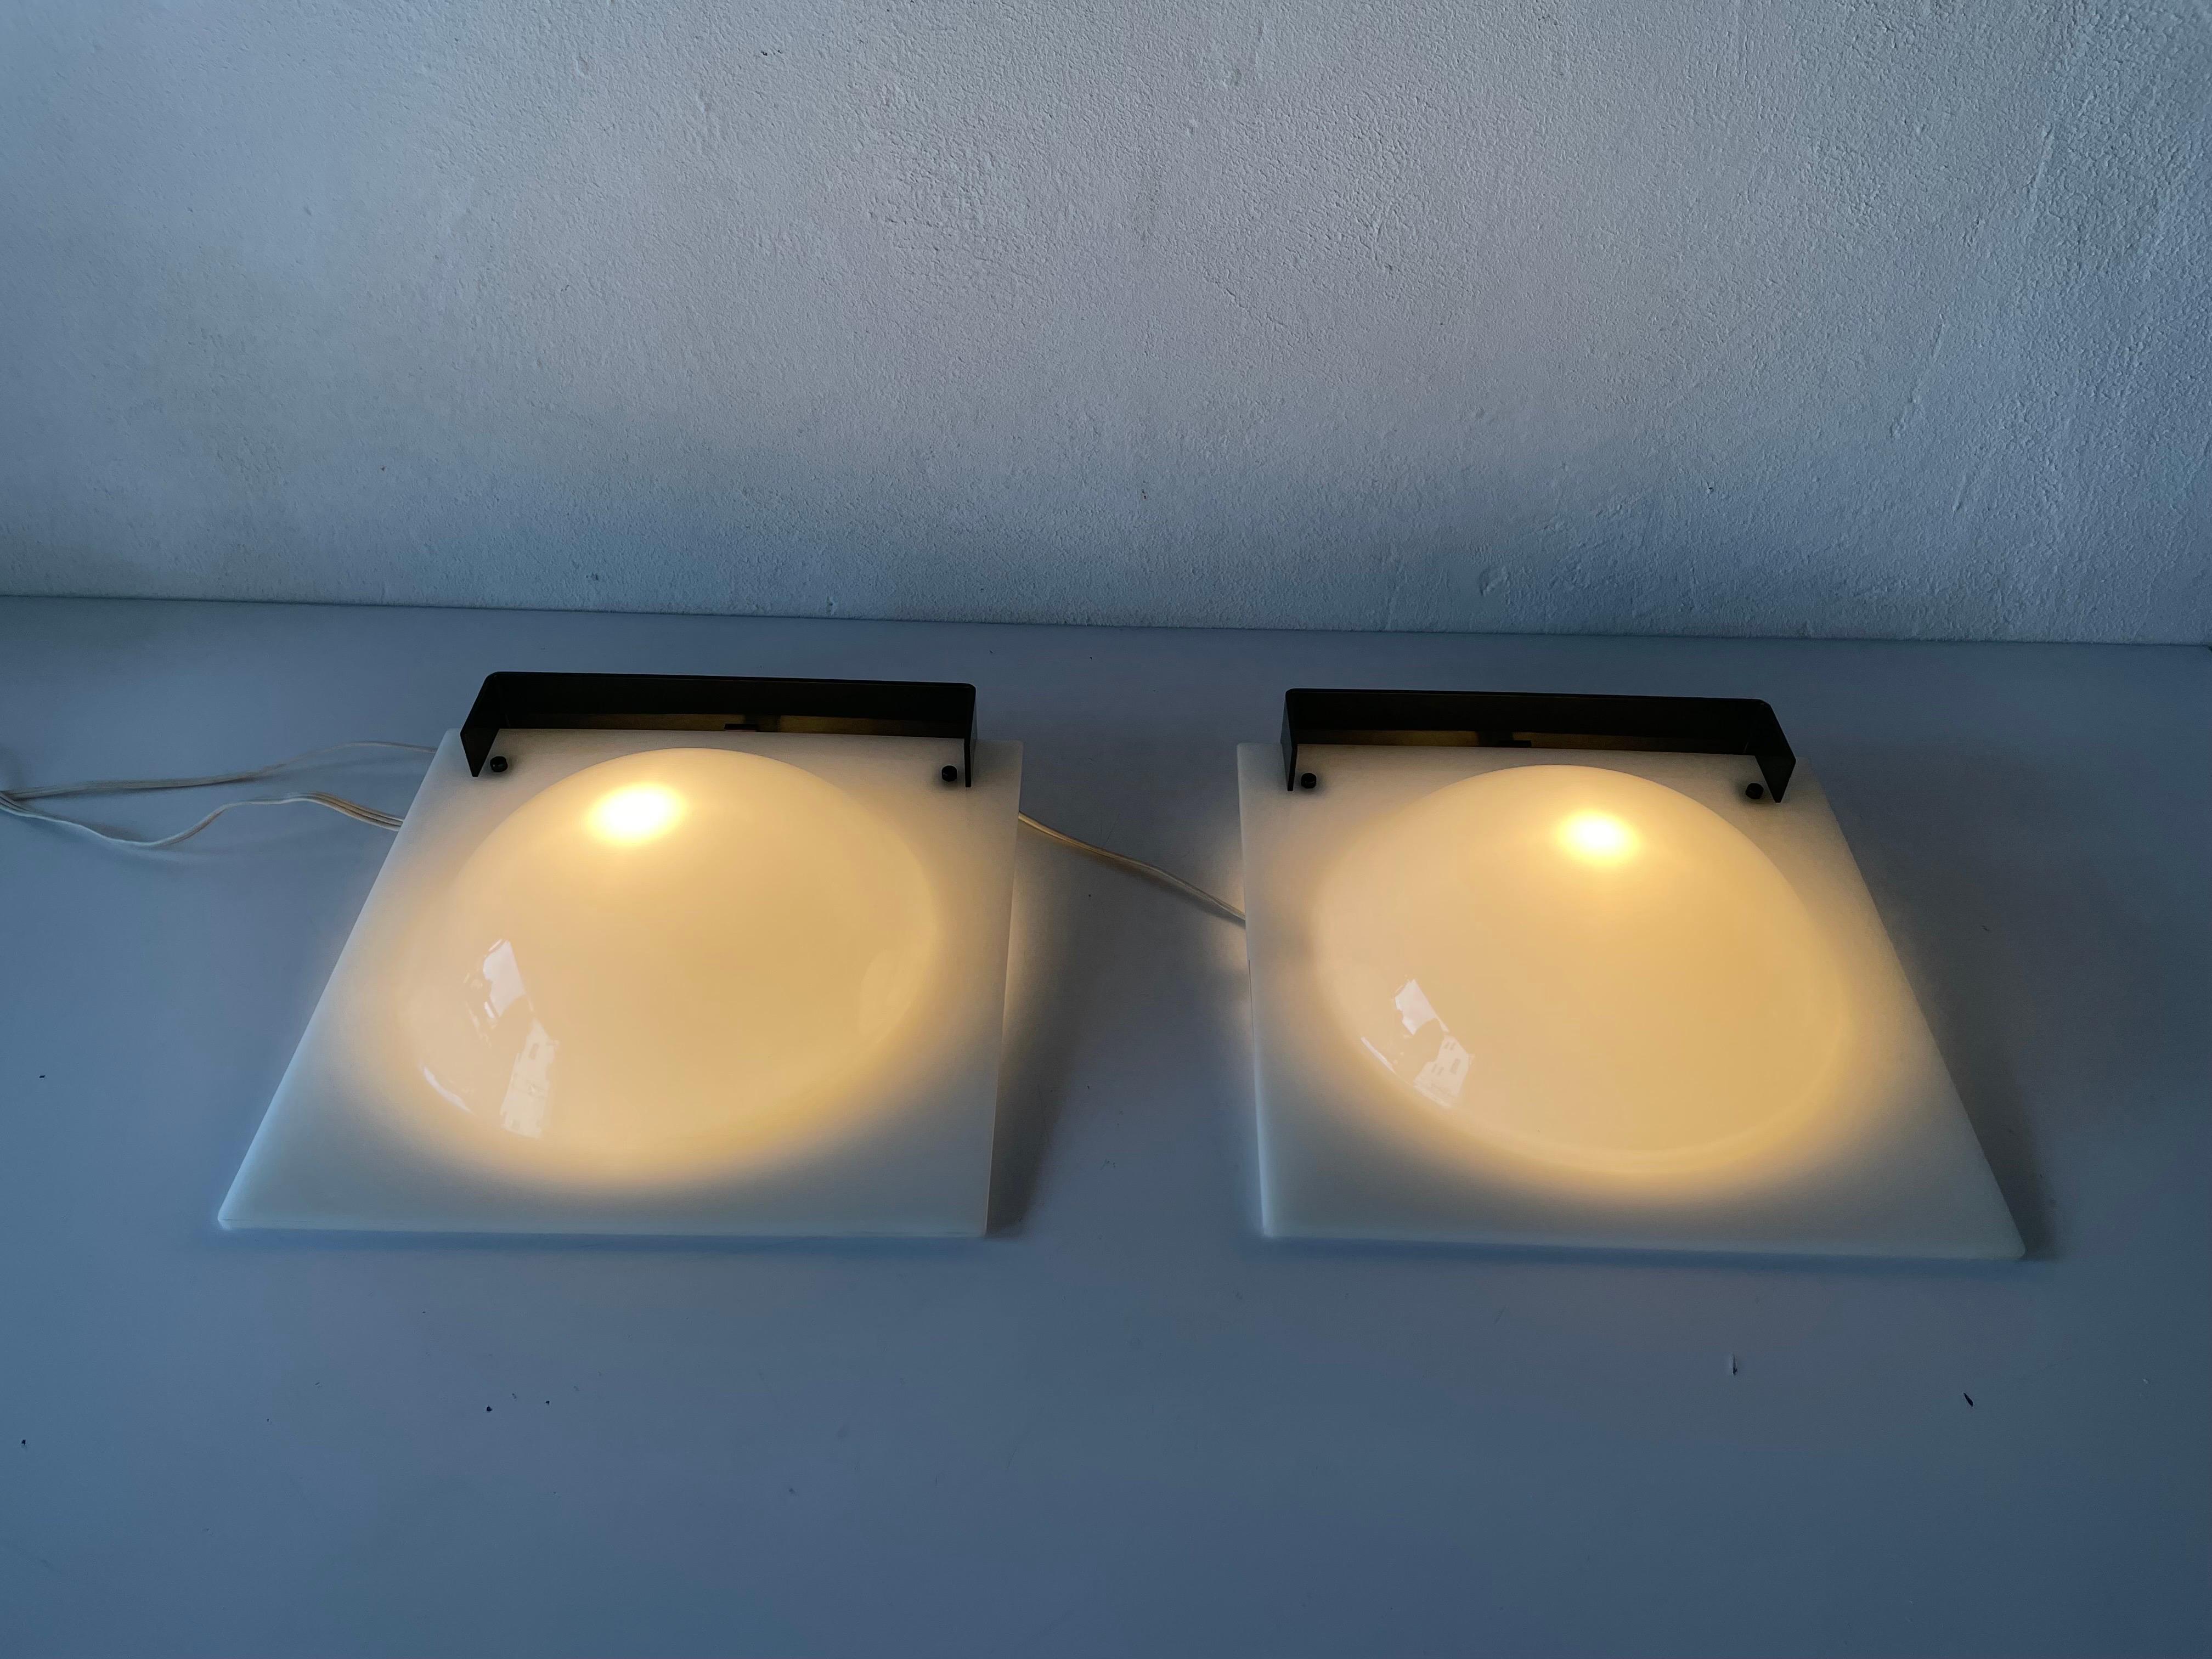 High Quality Plexiglass Bubble Design Pair of Wall Lamps, 1960s, Italy For Sale 4